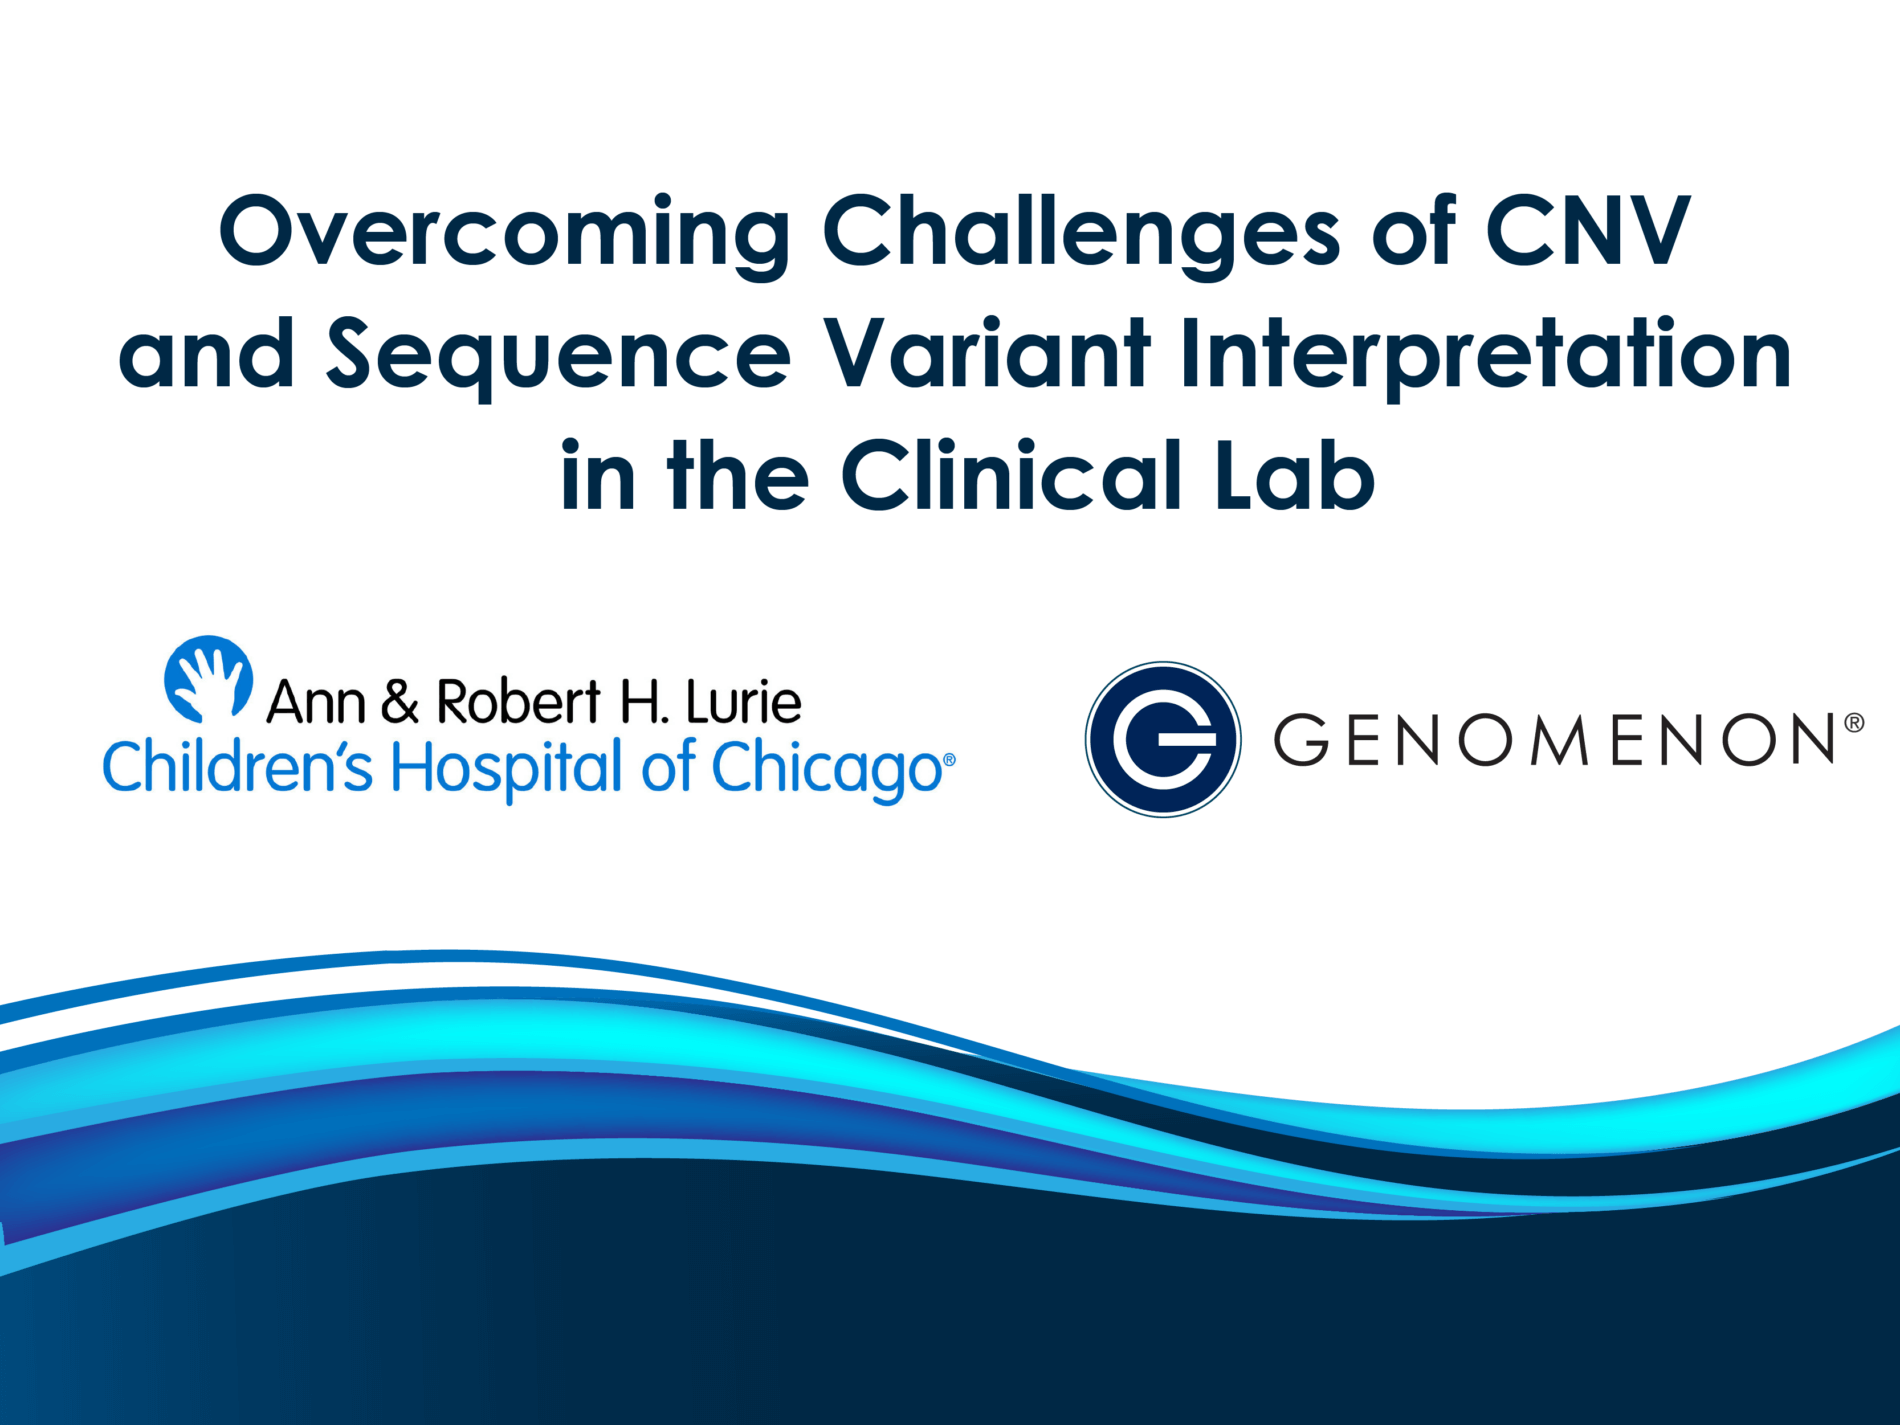 LATEST WEBINAR<h5>Overcoming Challenges of CNV and Sequence Variant Interpretation in the Clinical Lab </b><br><h6><b>Thursday, July 21, 2022 </h6></b>